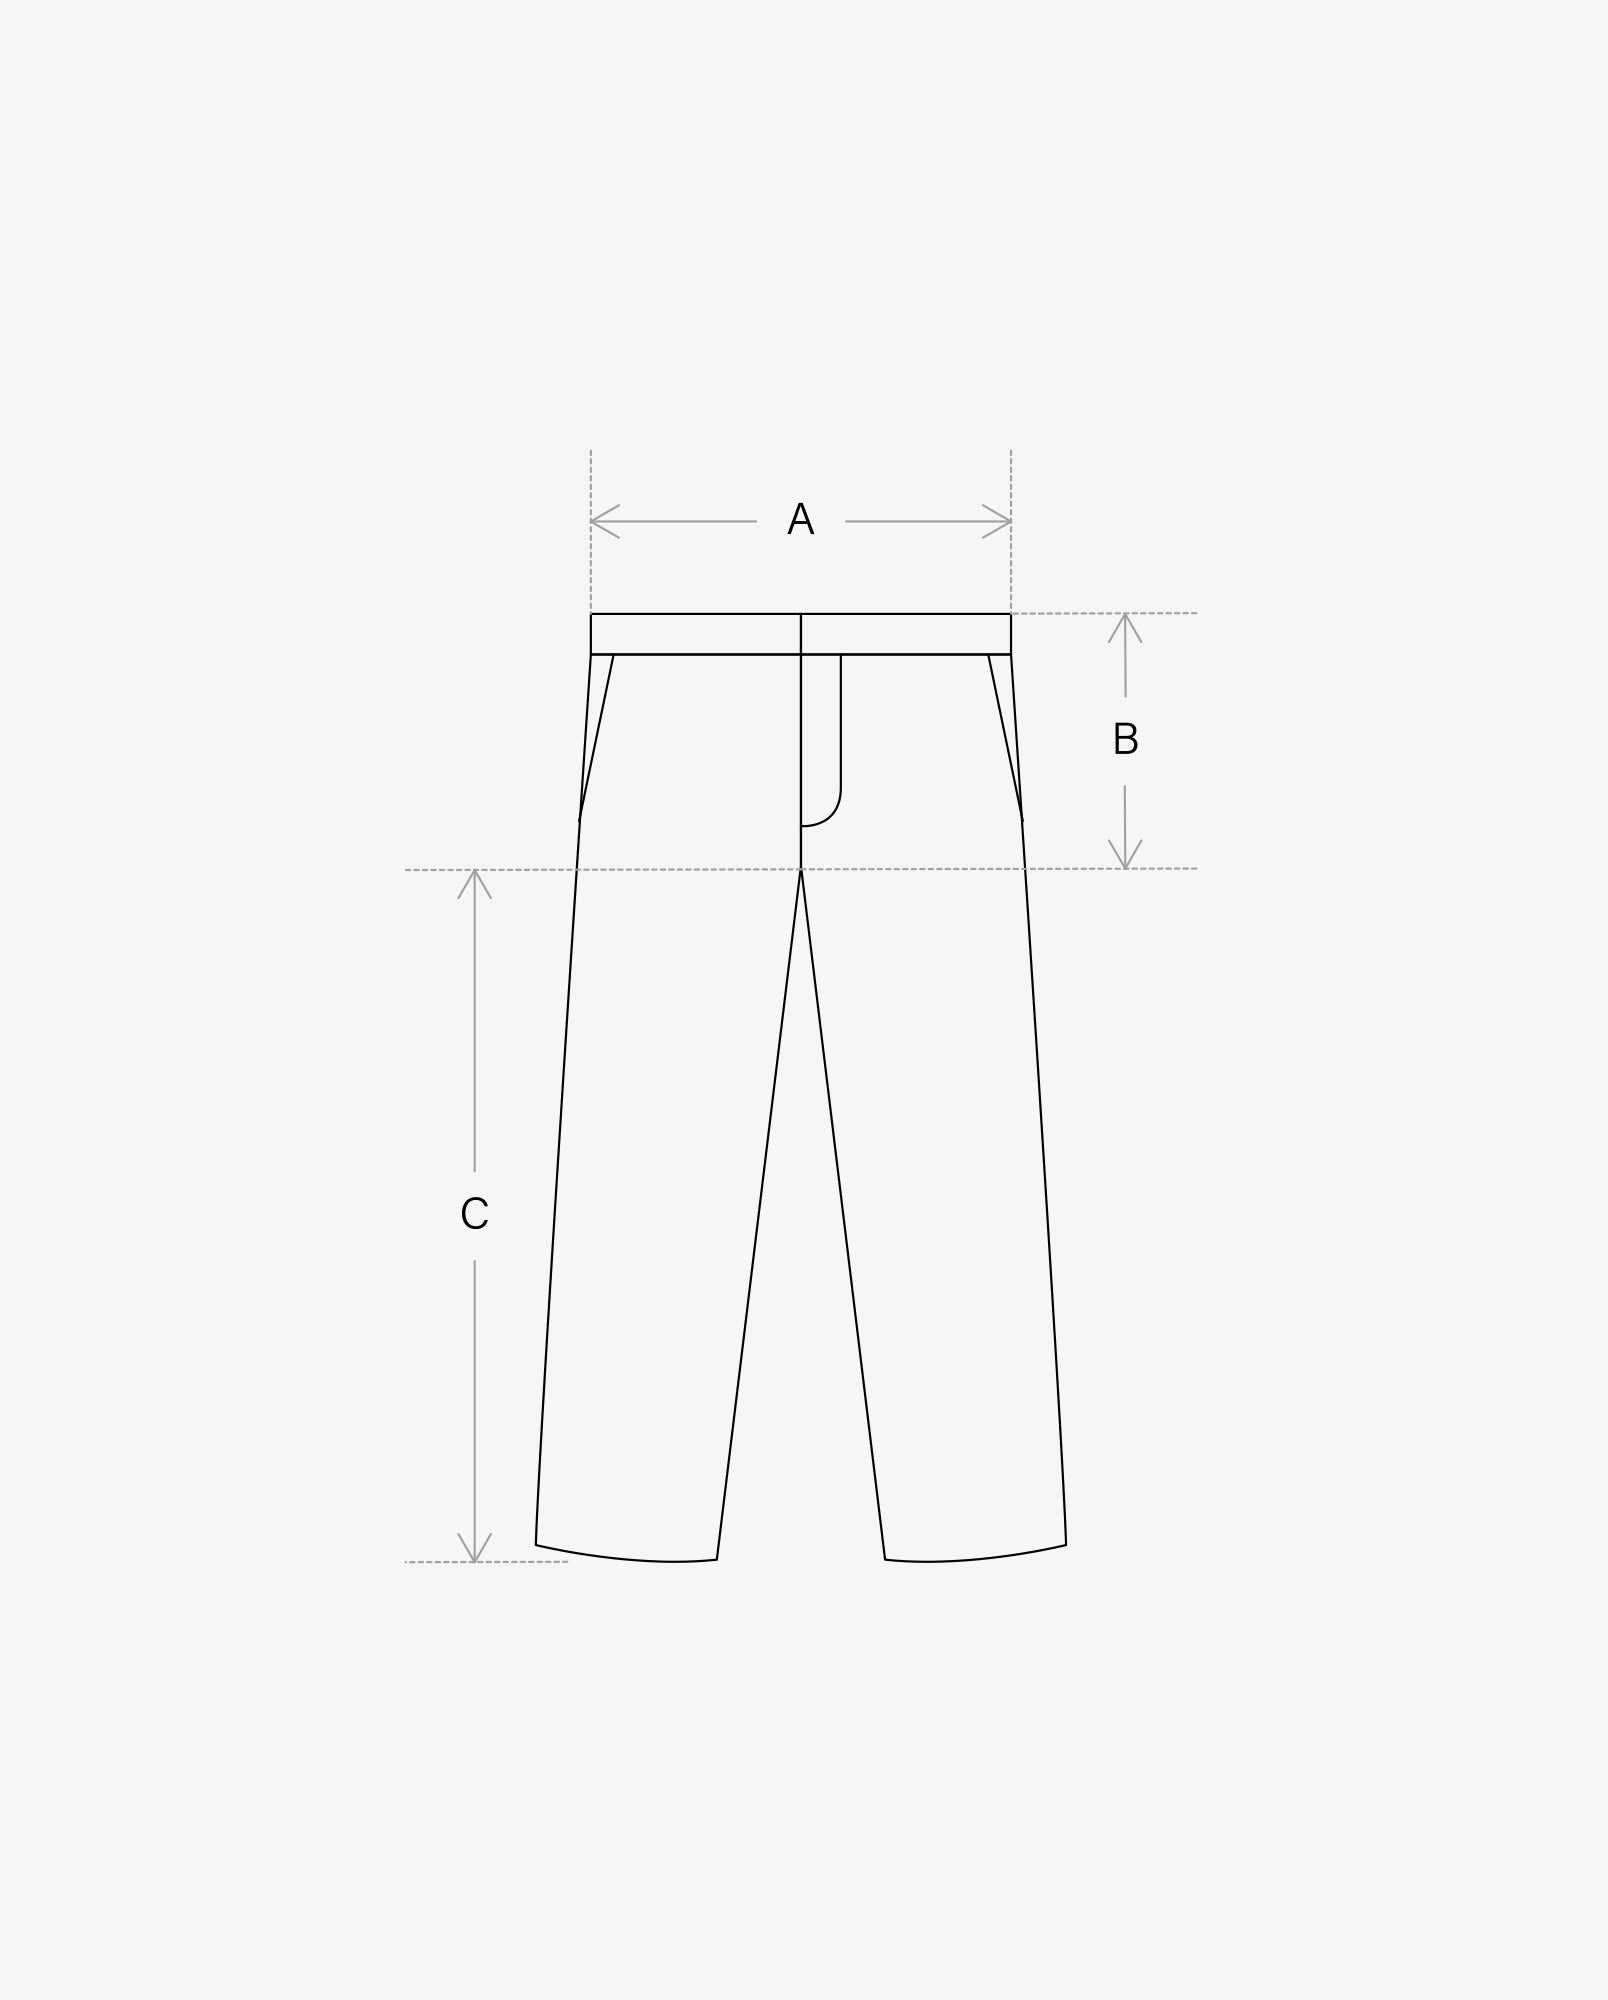 Utility Trousers / Size 29,31